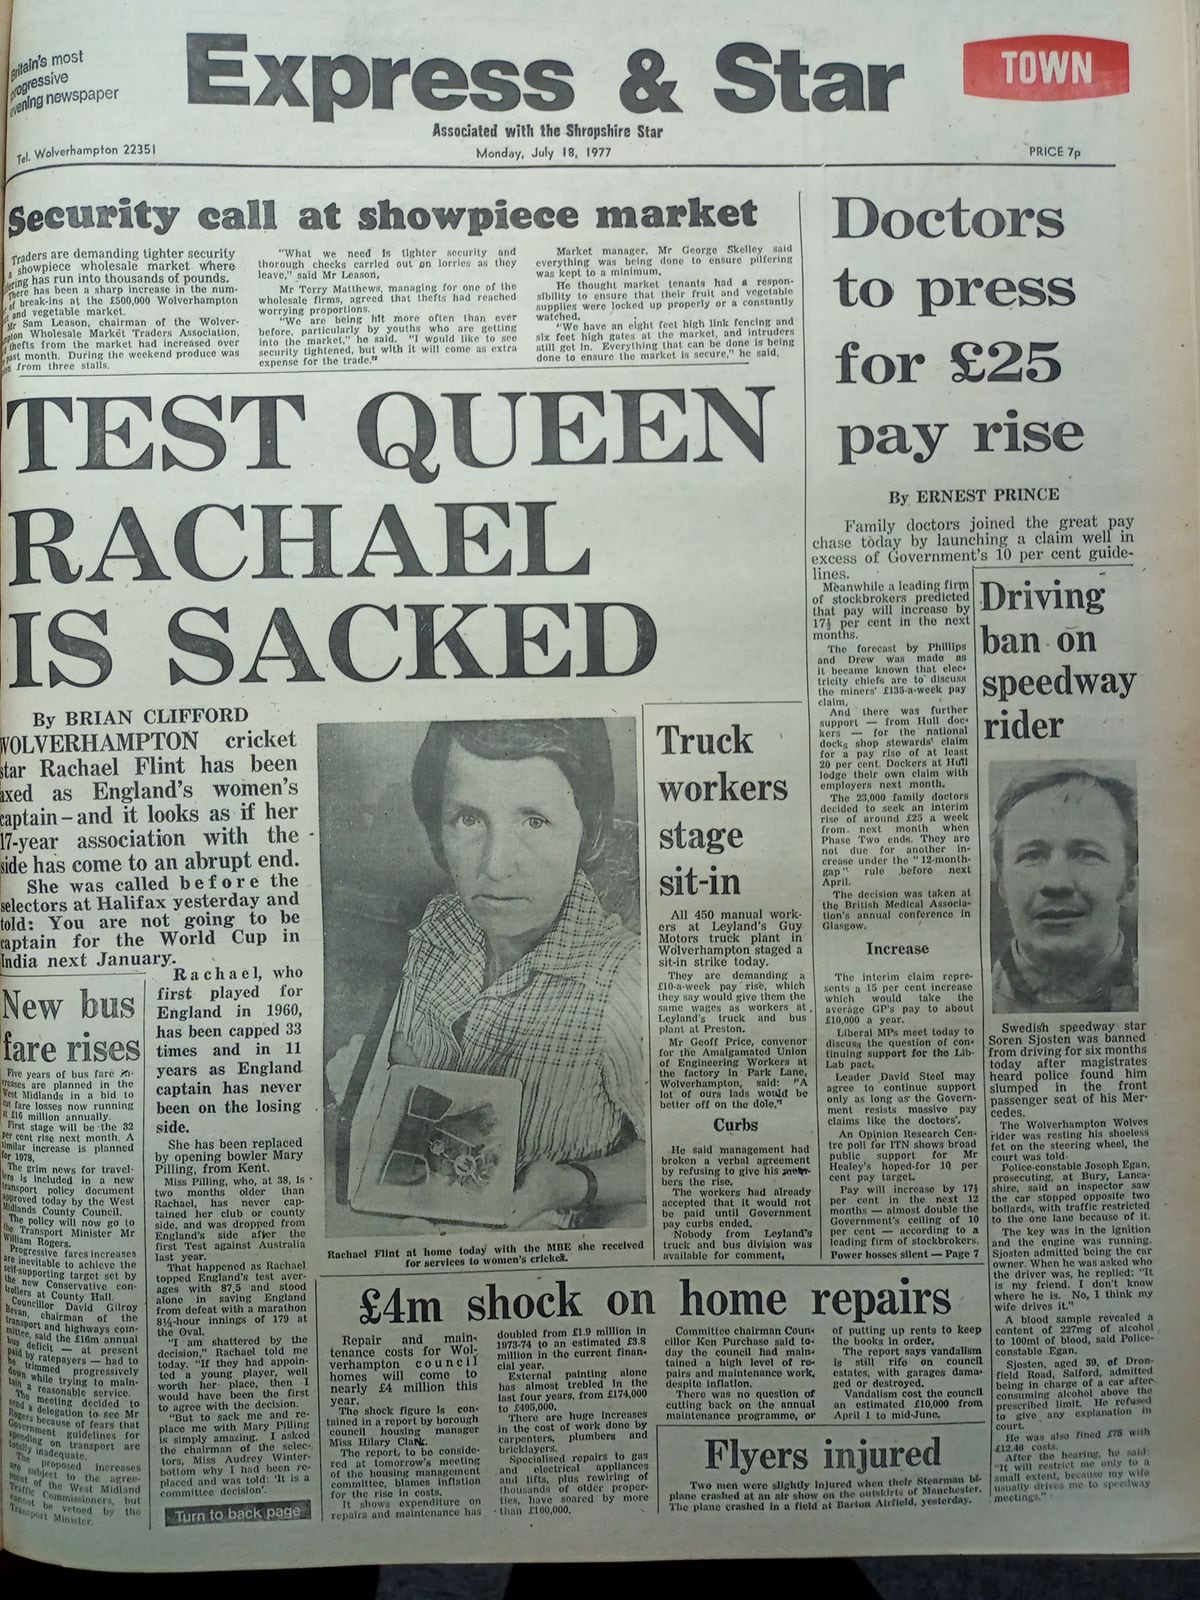 How the Express & Star reported Rachael Heyhoe Flint's dismissal as captain of the England Test team